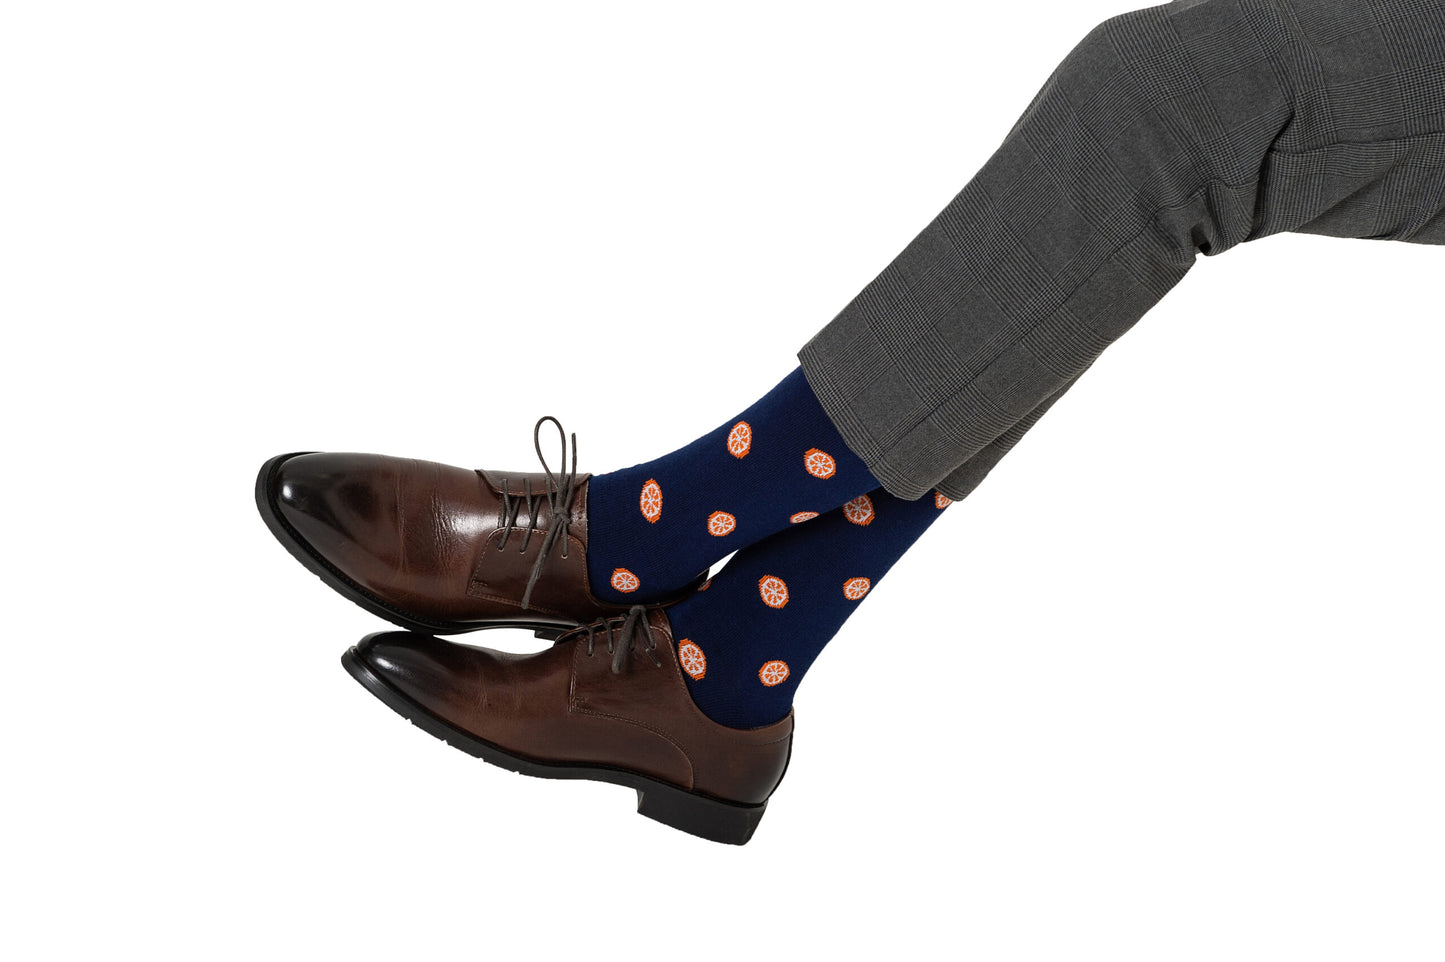 A person wearing brown leather shoes and grey trousers with Blue Socks adorned with citrusy Orange patterns, crossed at the ankles heel to toe against a white background.